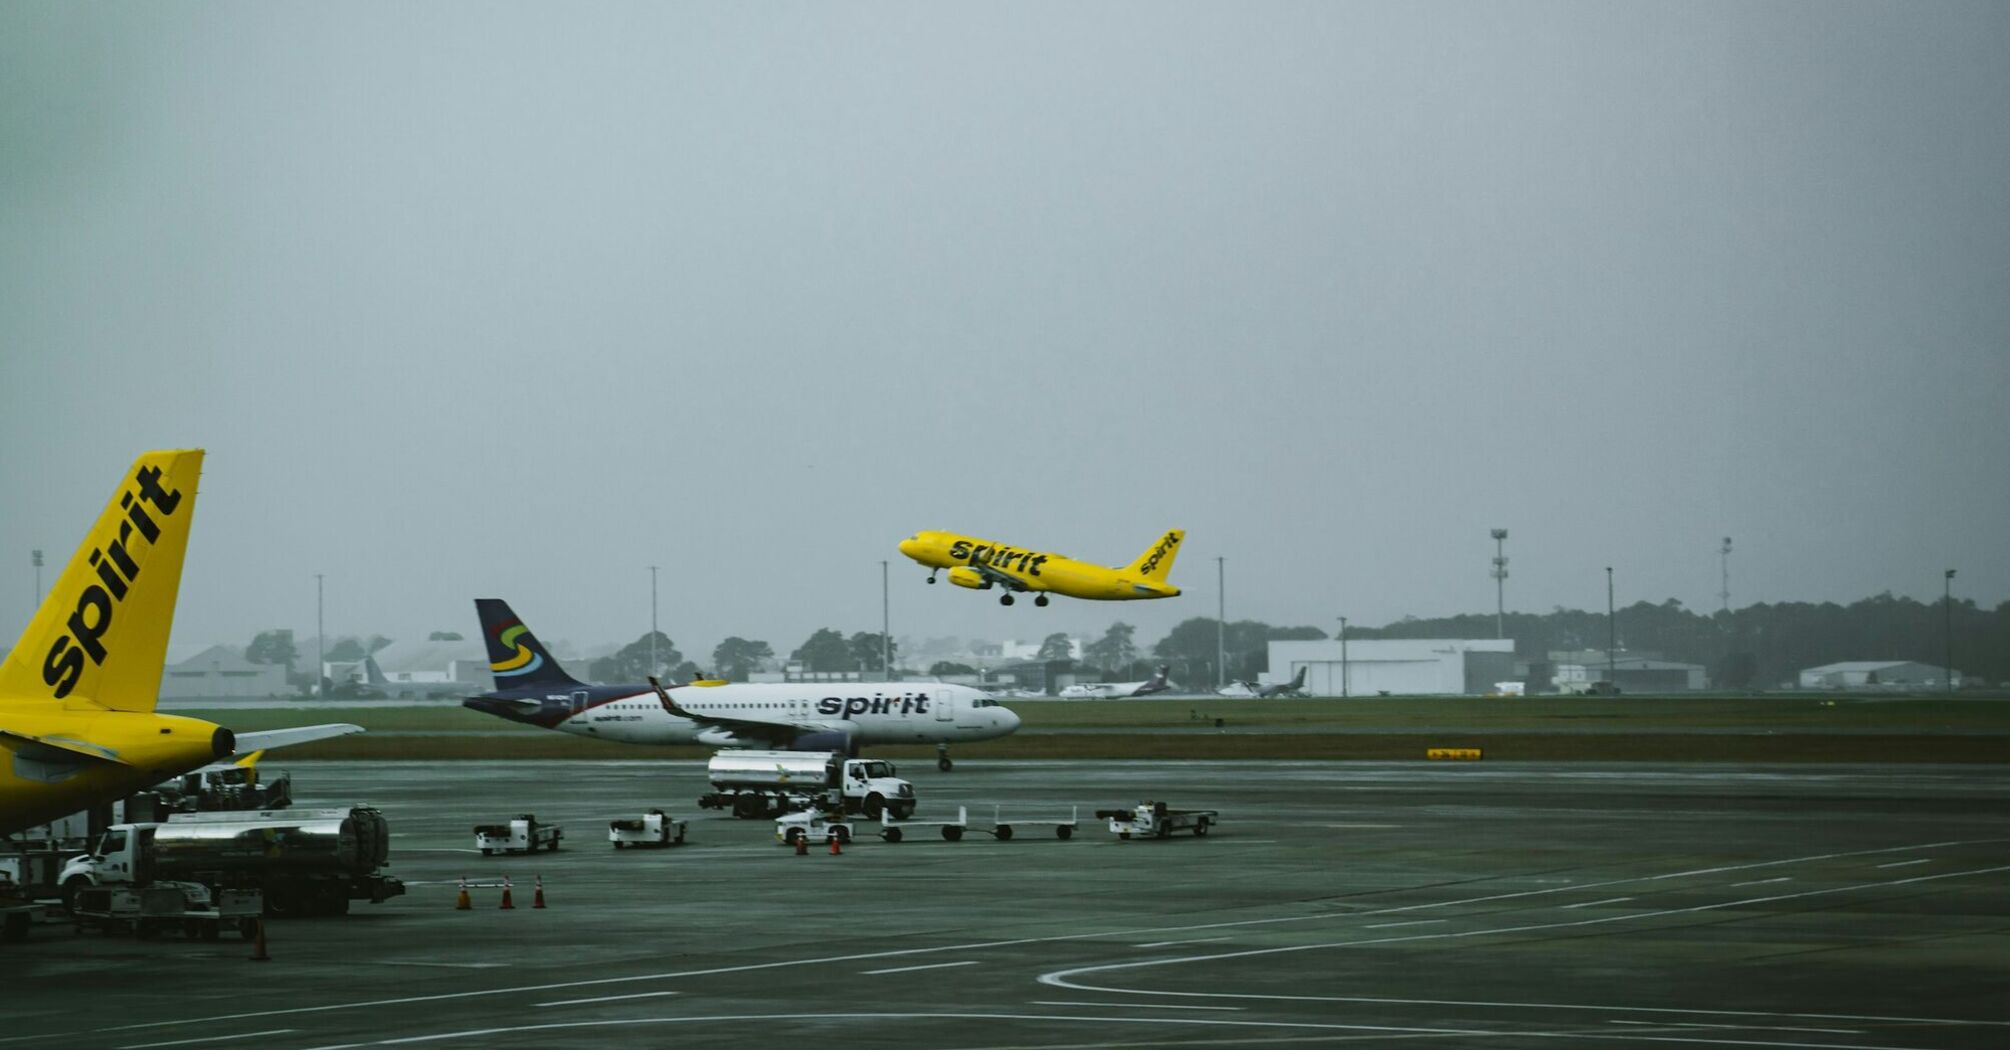 Spirit Airlines planes at an airport